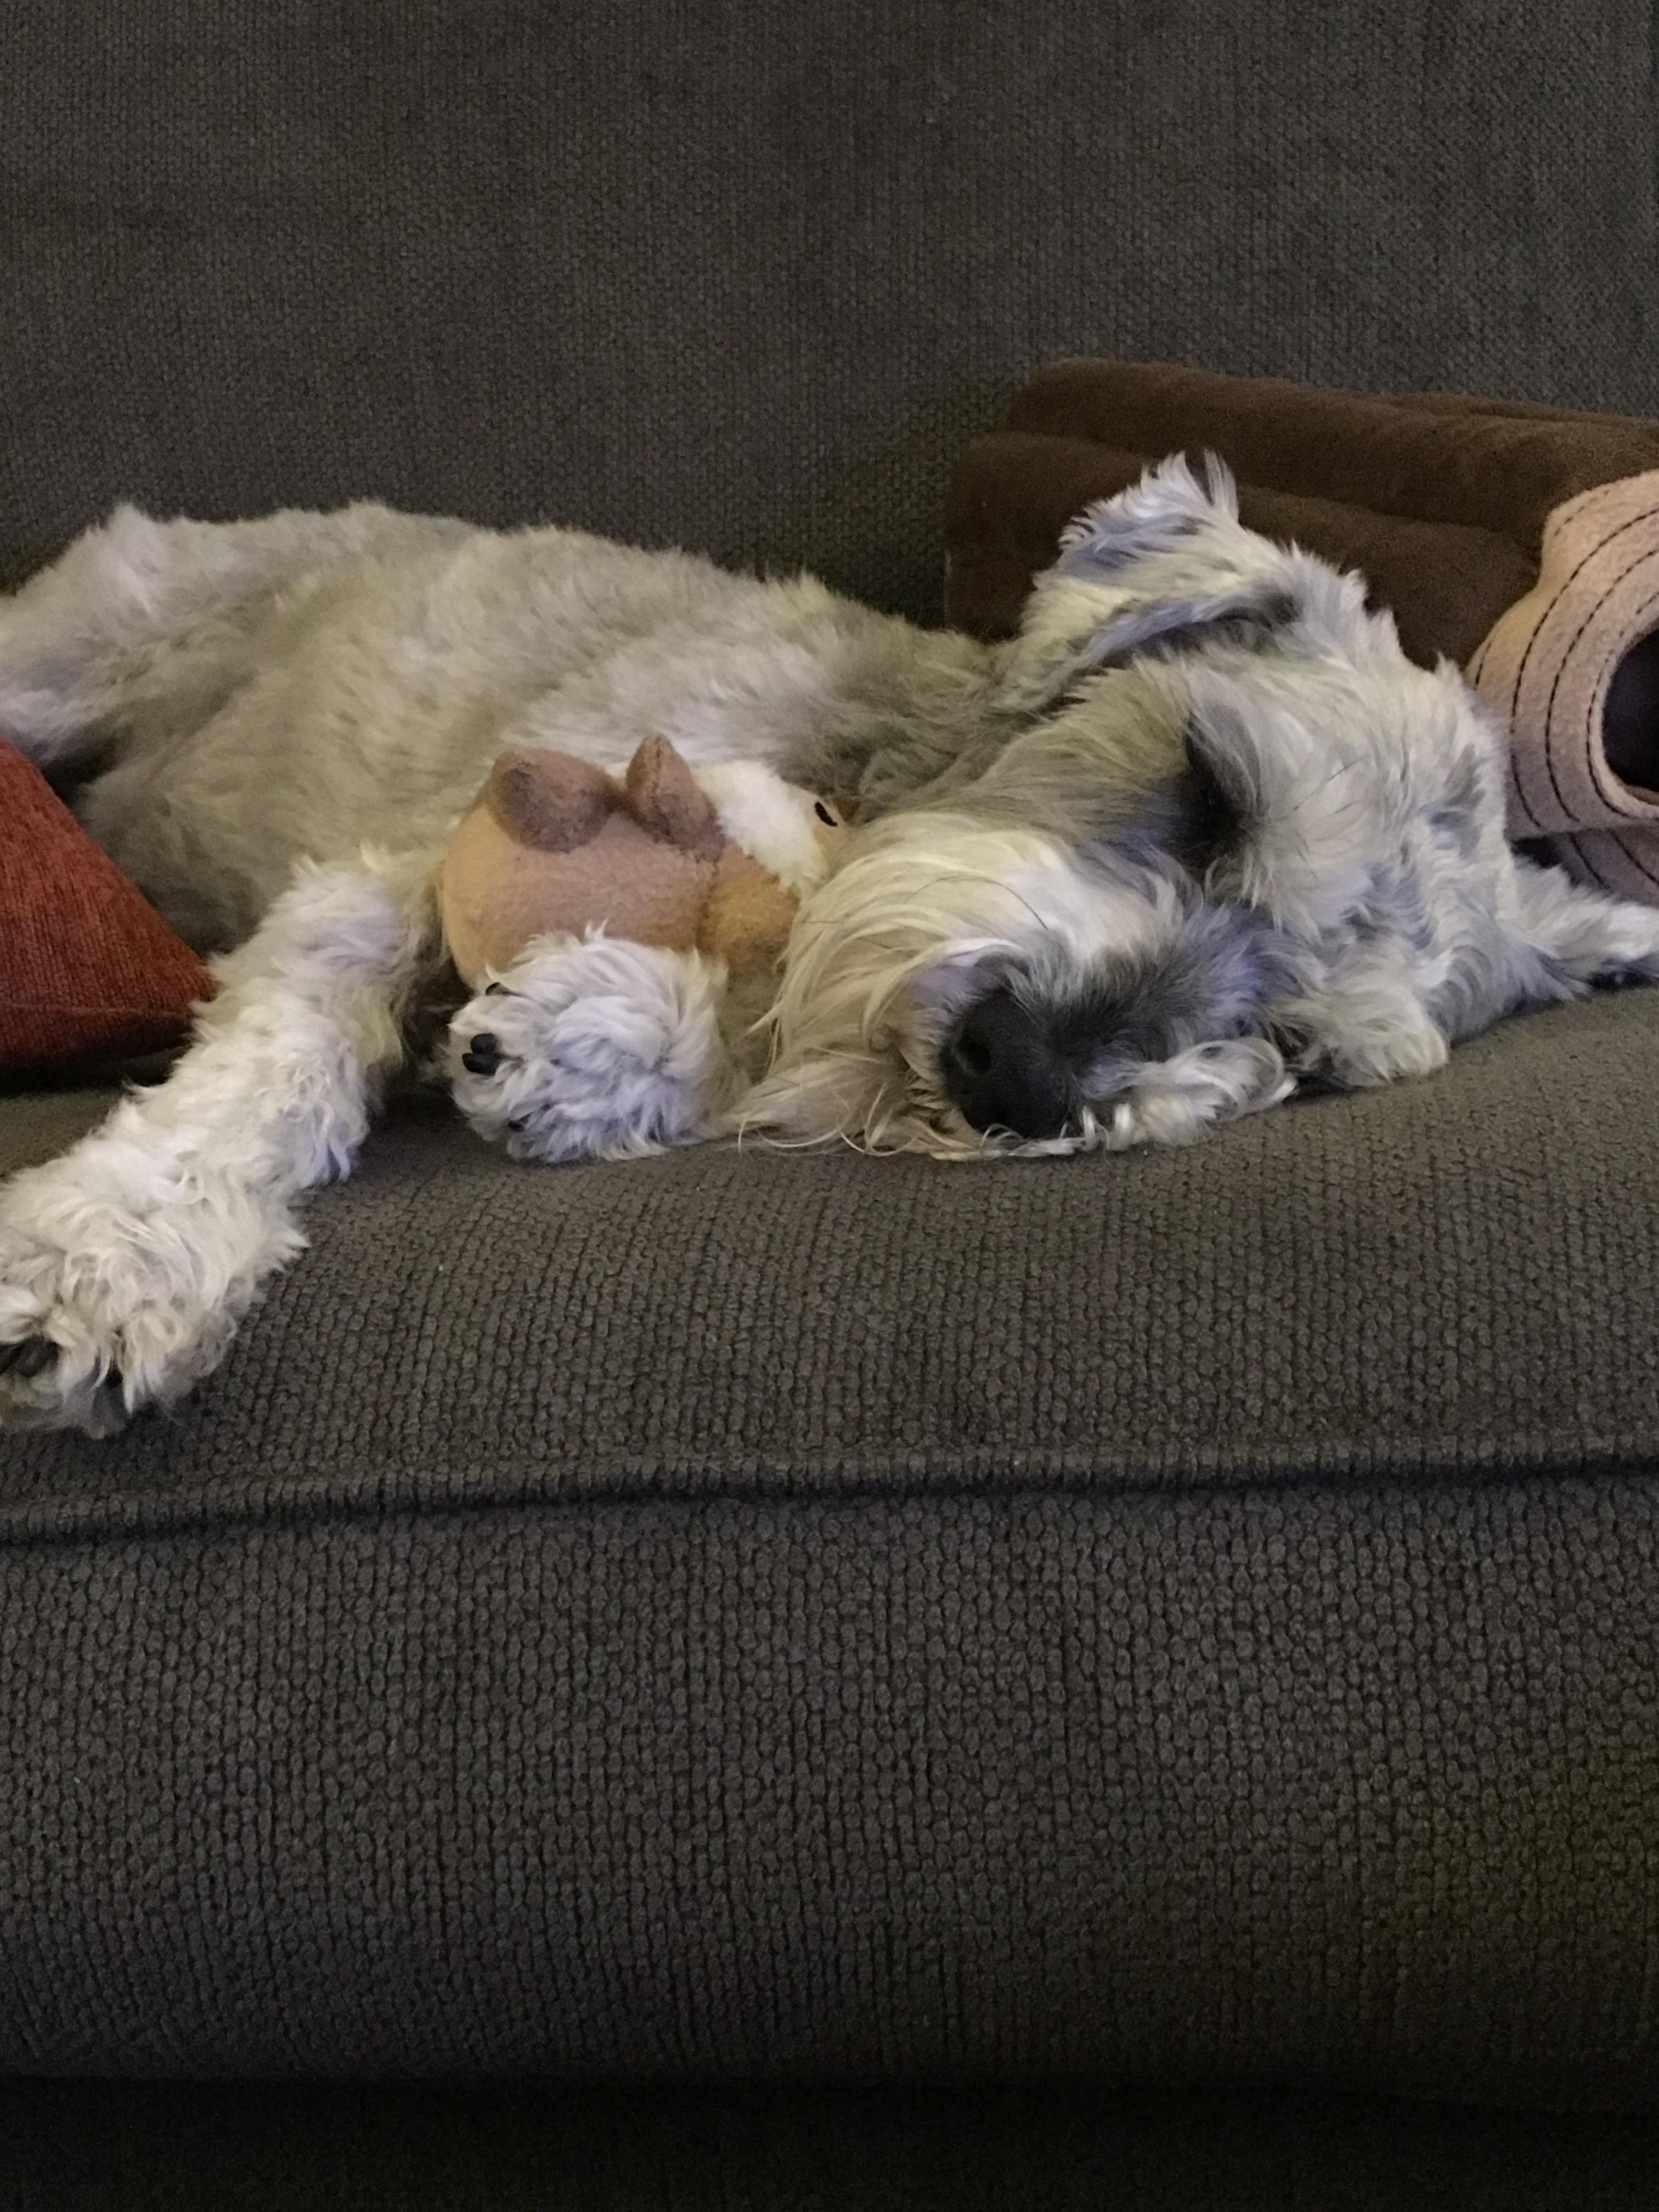 A Schnauzer sleeping on the couch with its stuffed toy